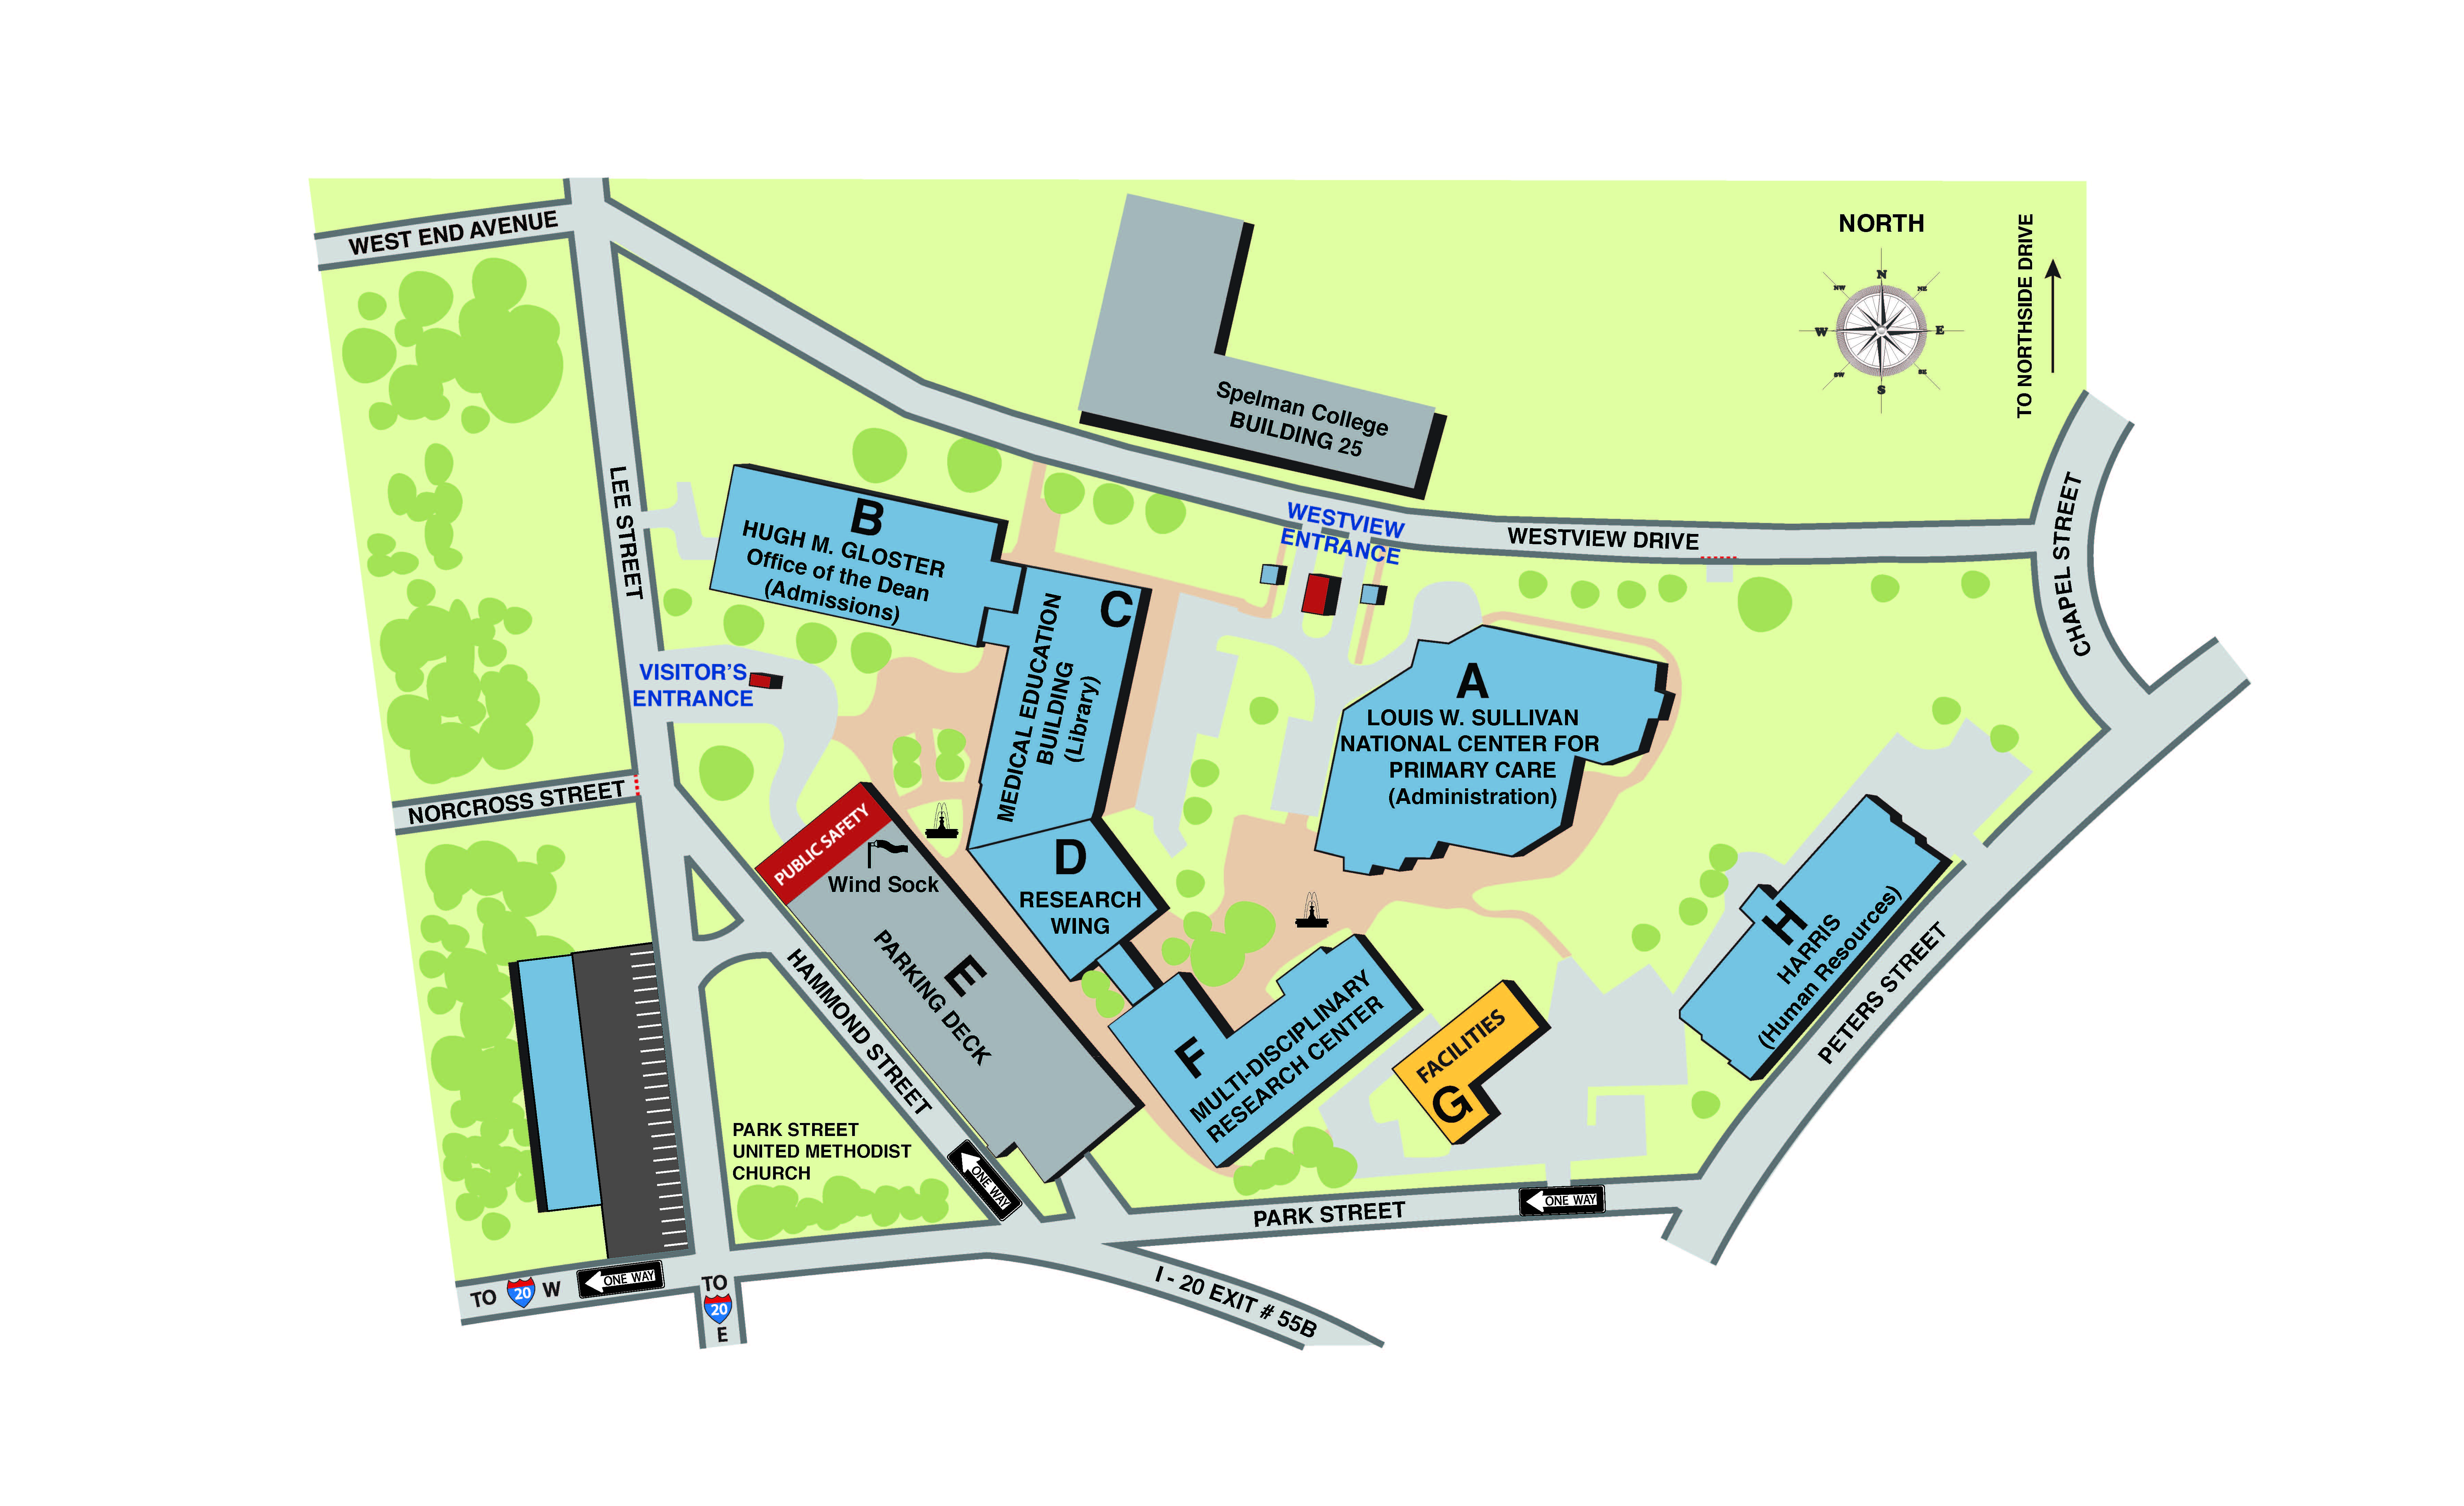 Map of Morehouse School of Medicine